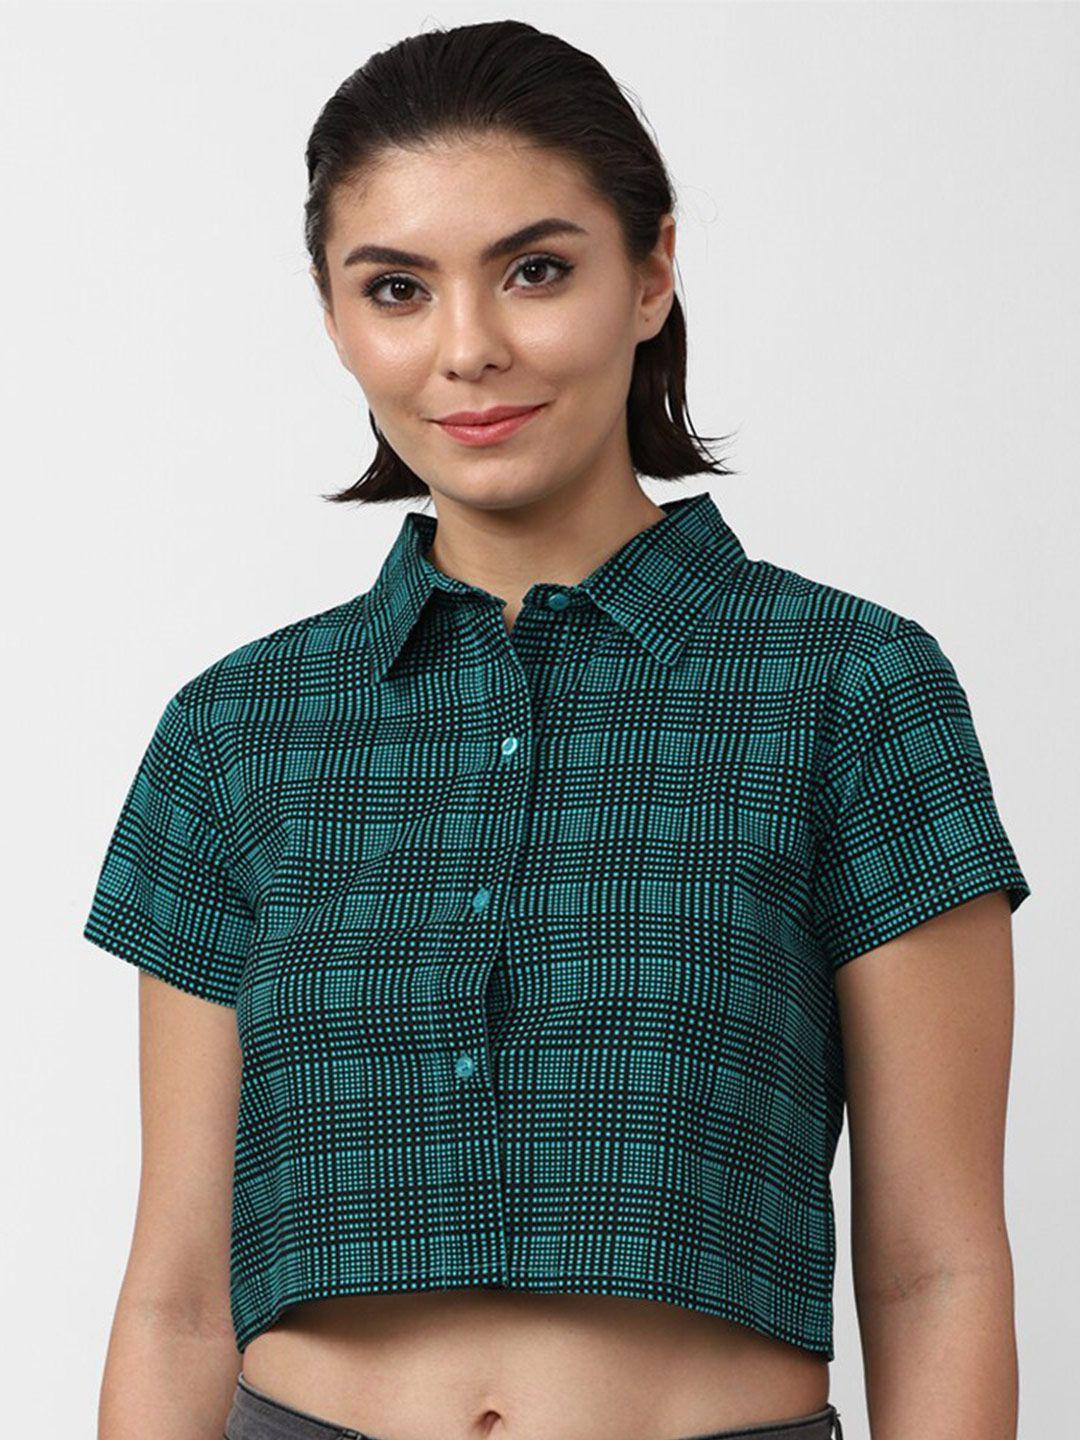 forever 21 women green & black checked shirt style pure cotton crop top